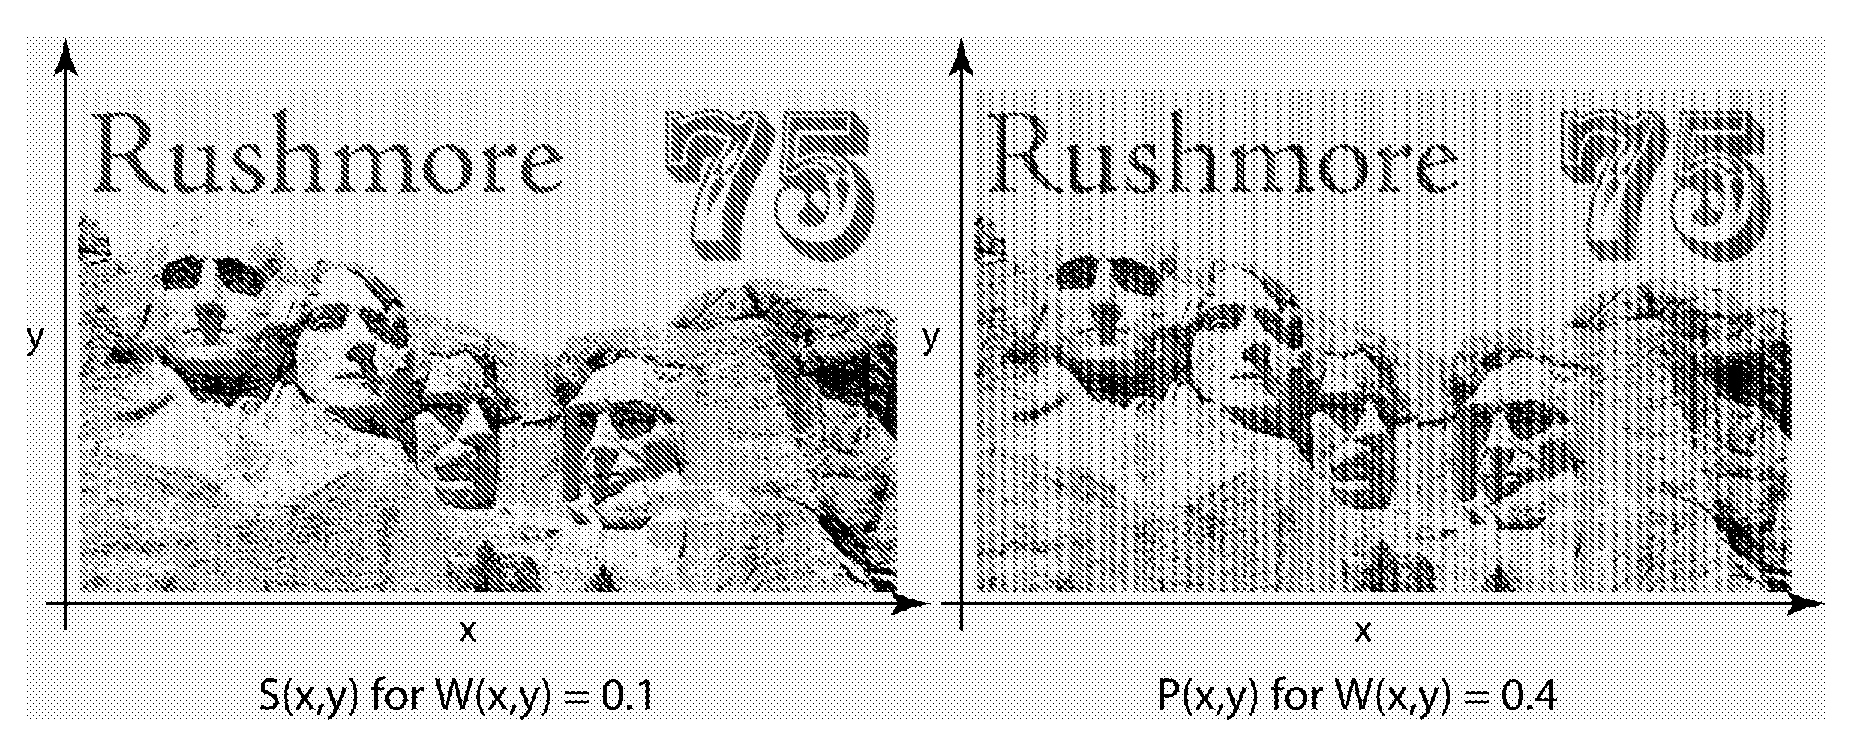 Banknotes with a Printed Security Image That Can be Detected with One-Dimensional Signal Processing